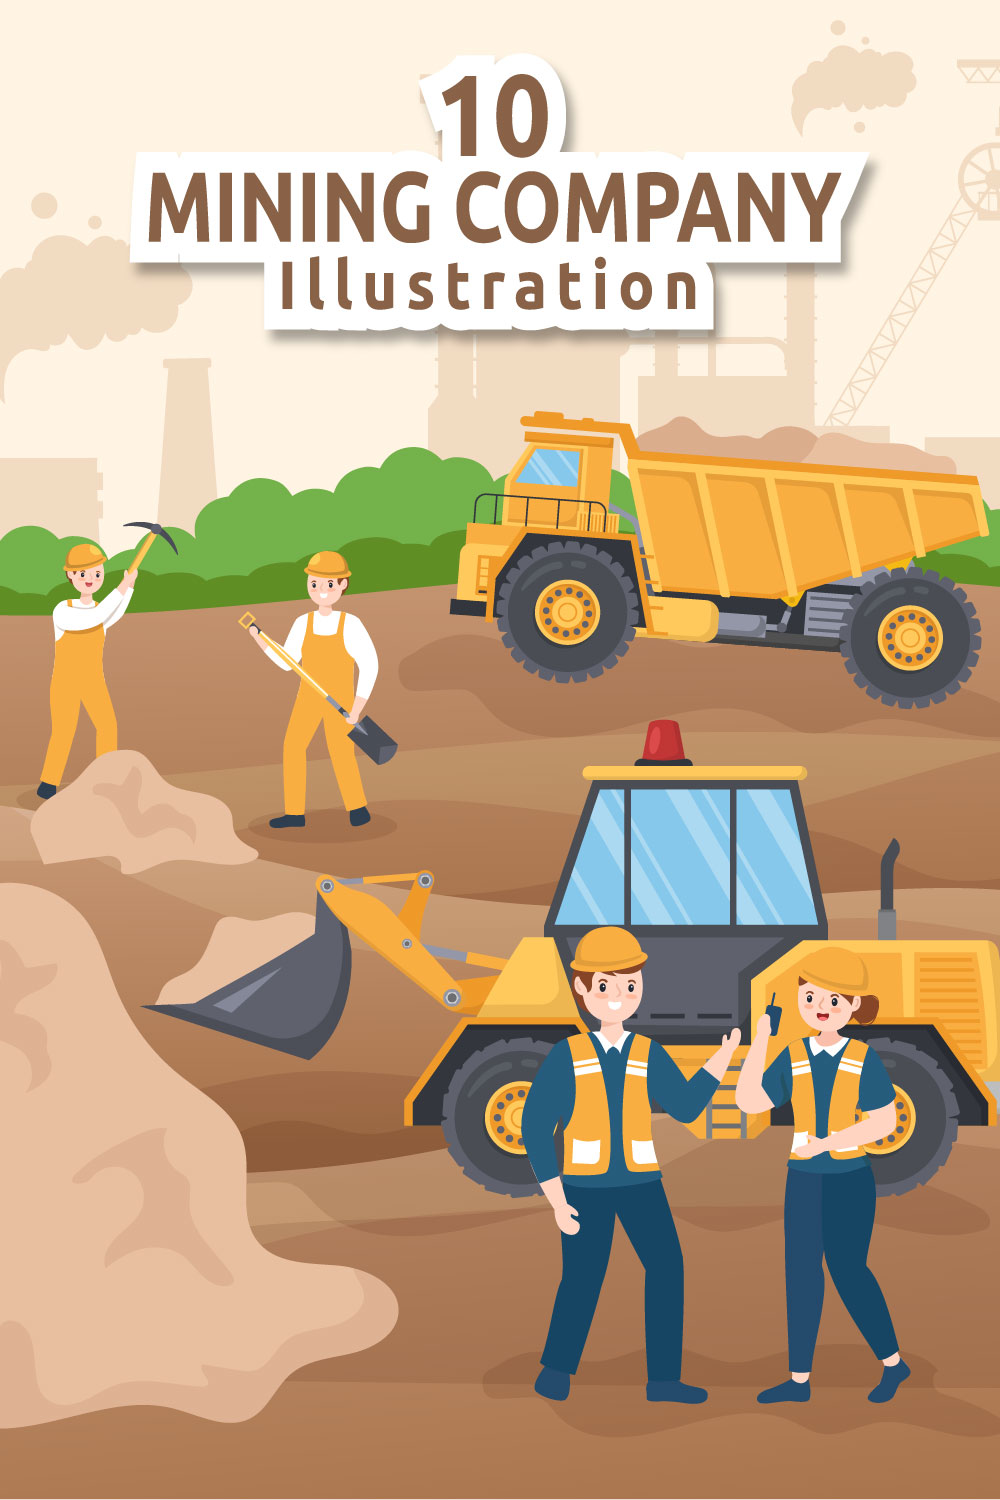 Exquisite cartoon image of a mining company with heavy yellow dump trucks